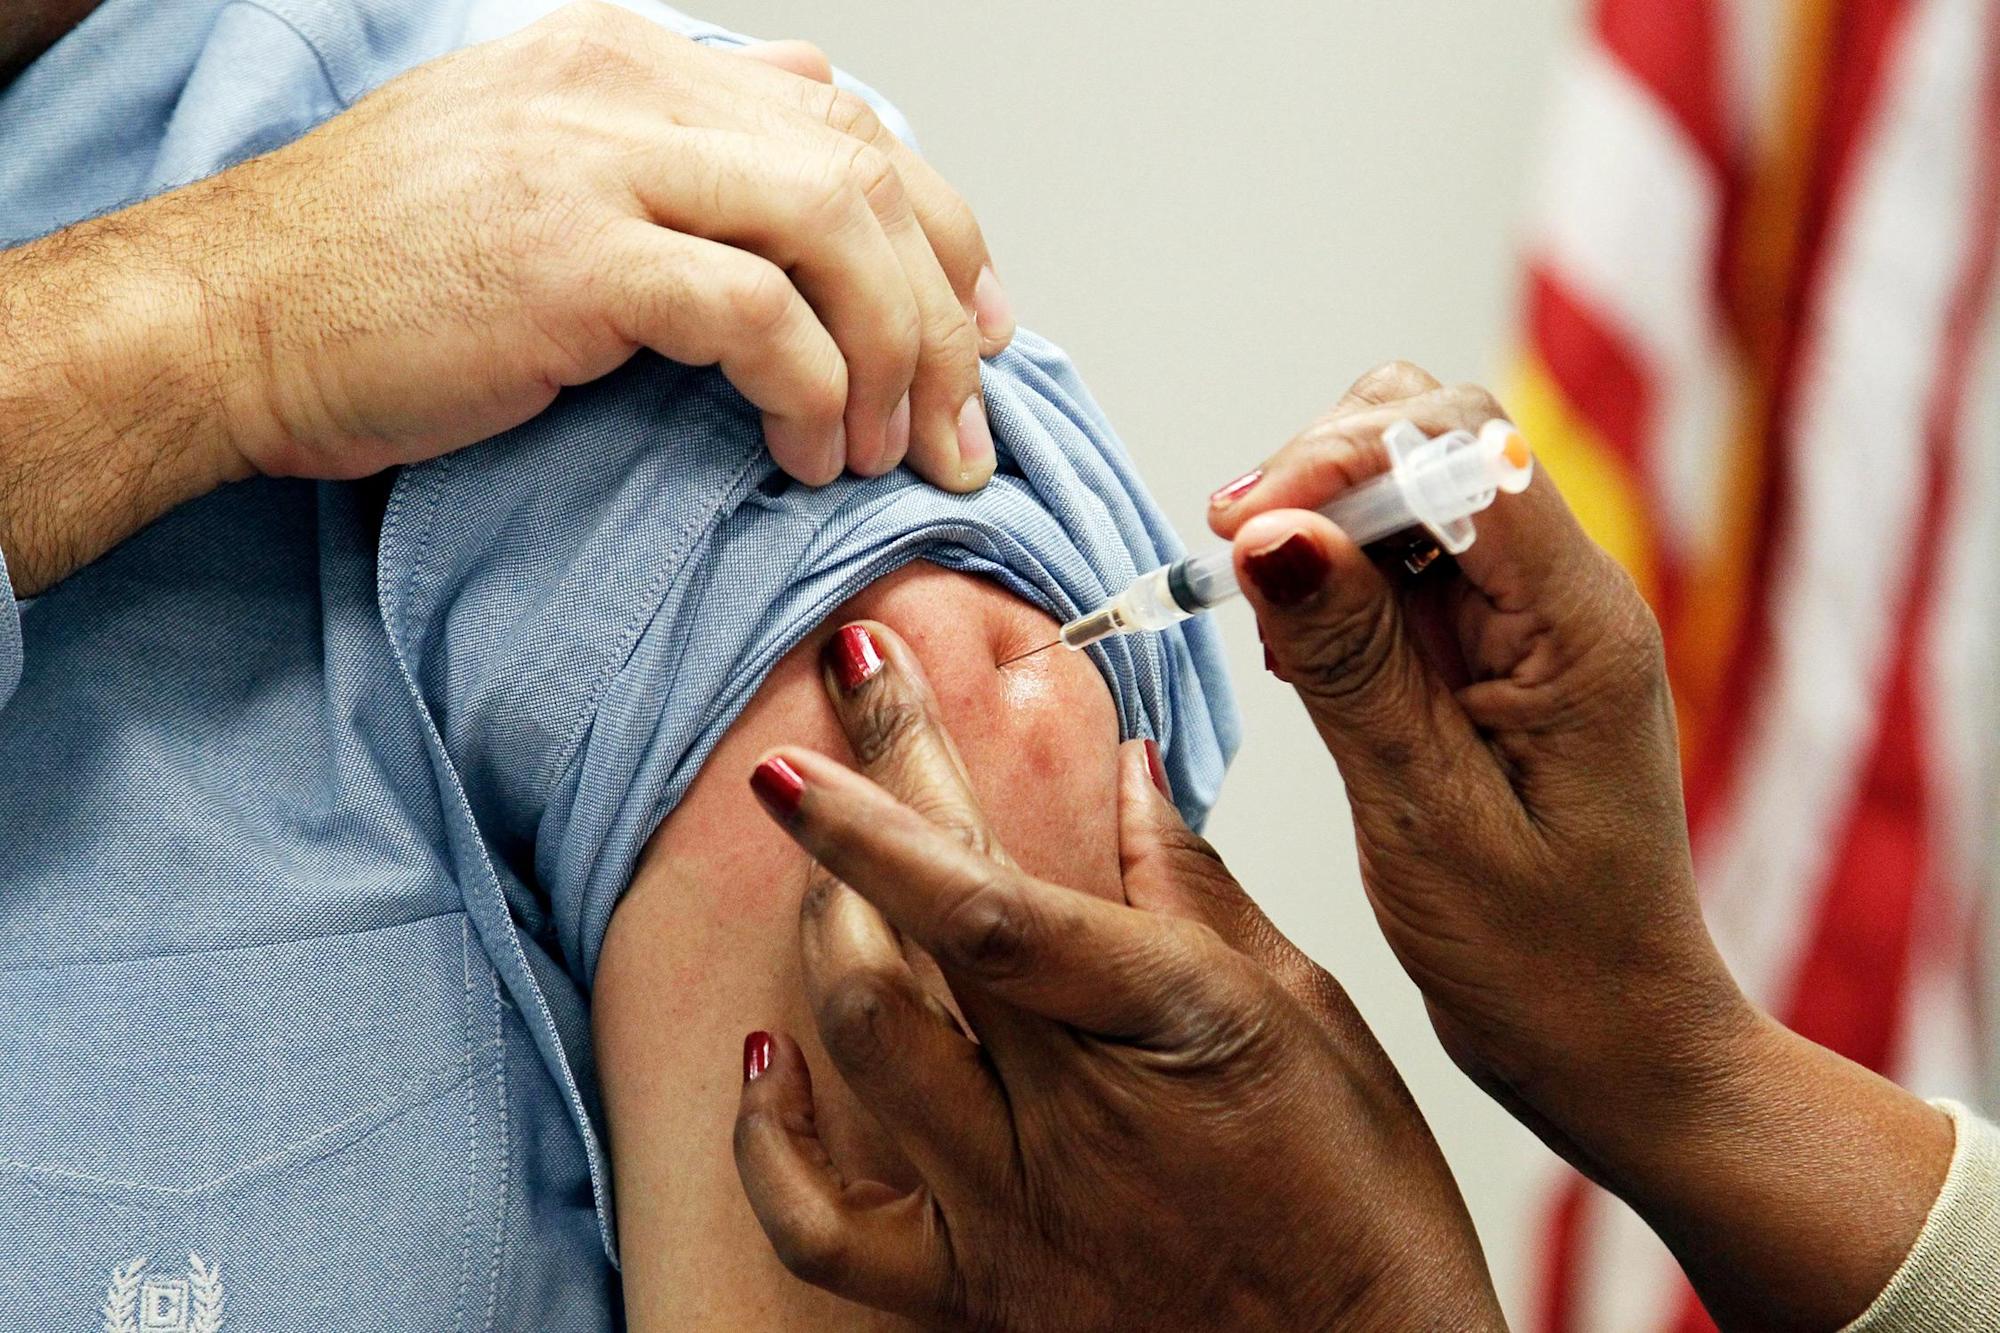 Monthly HIV Injection Treatments Could Soon Become Available